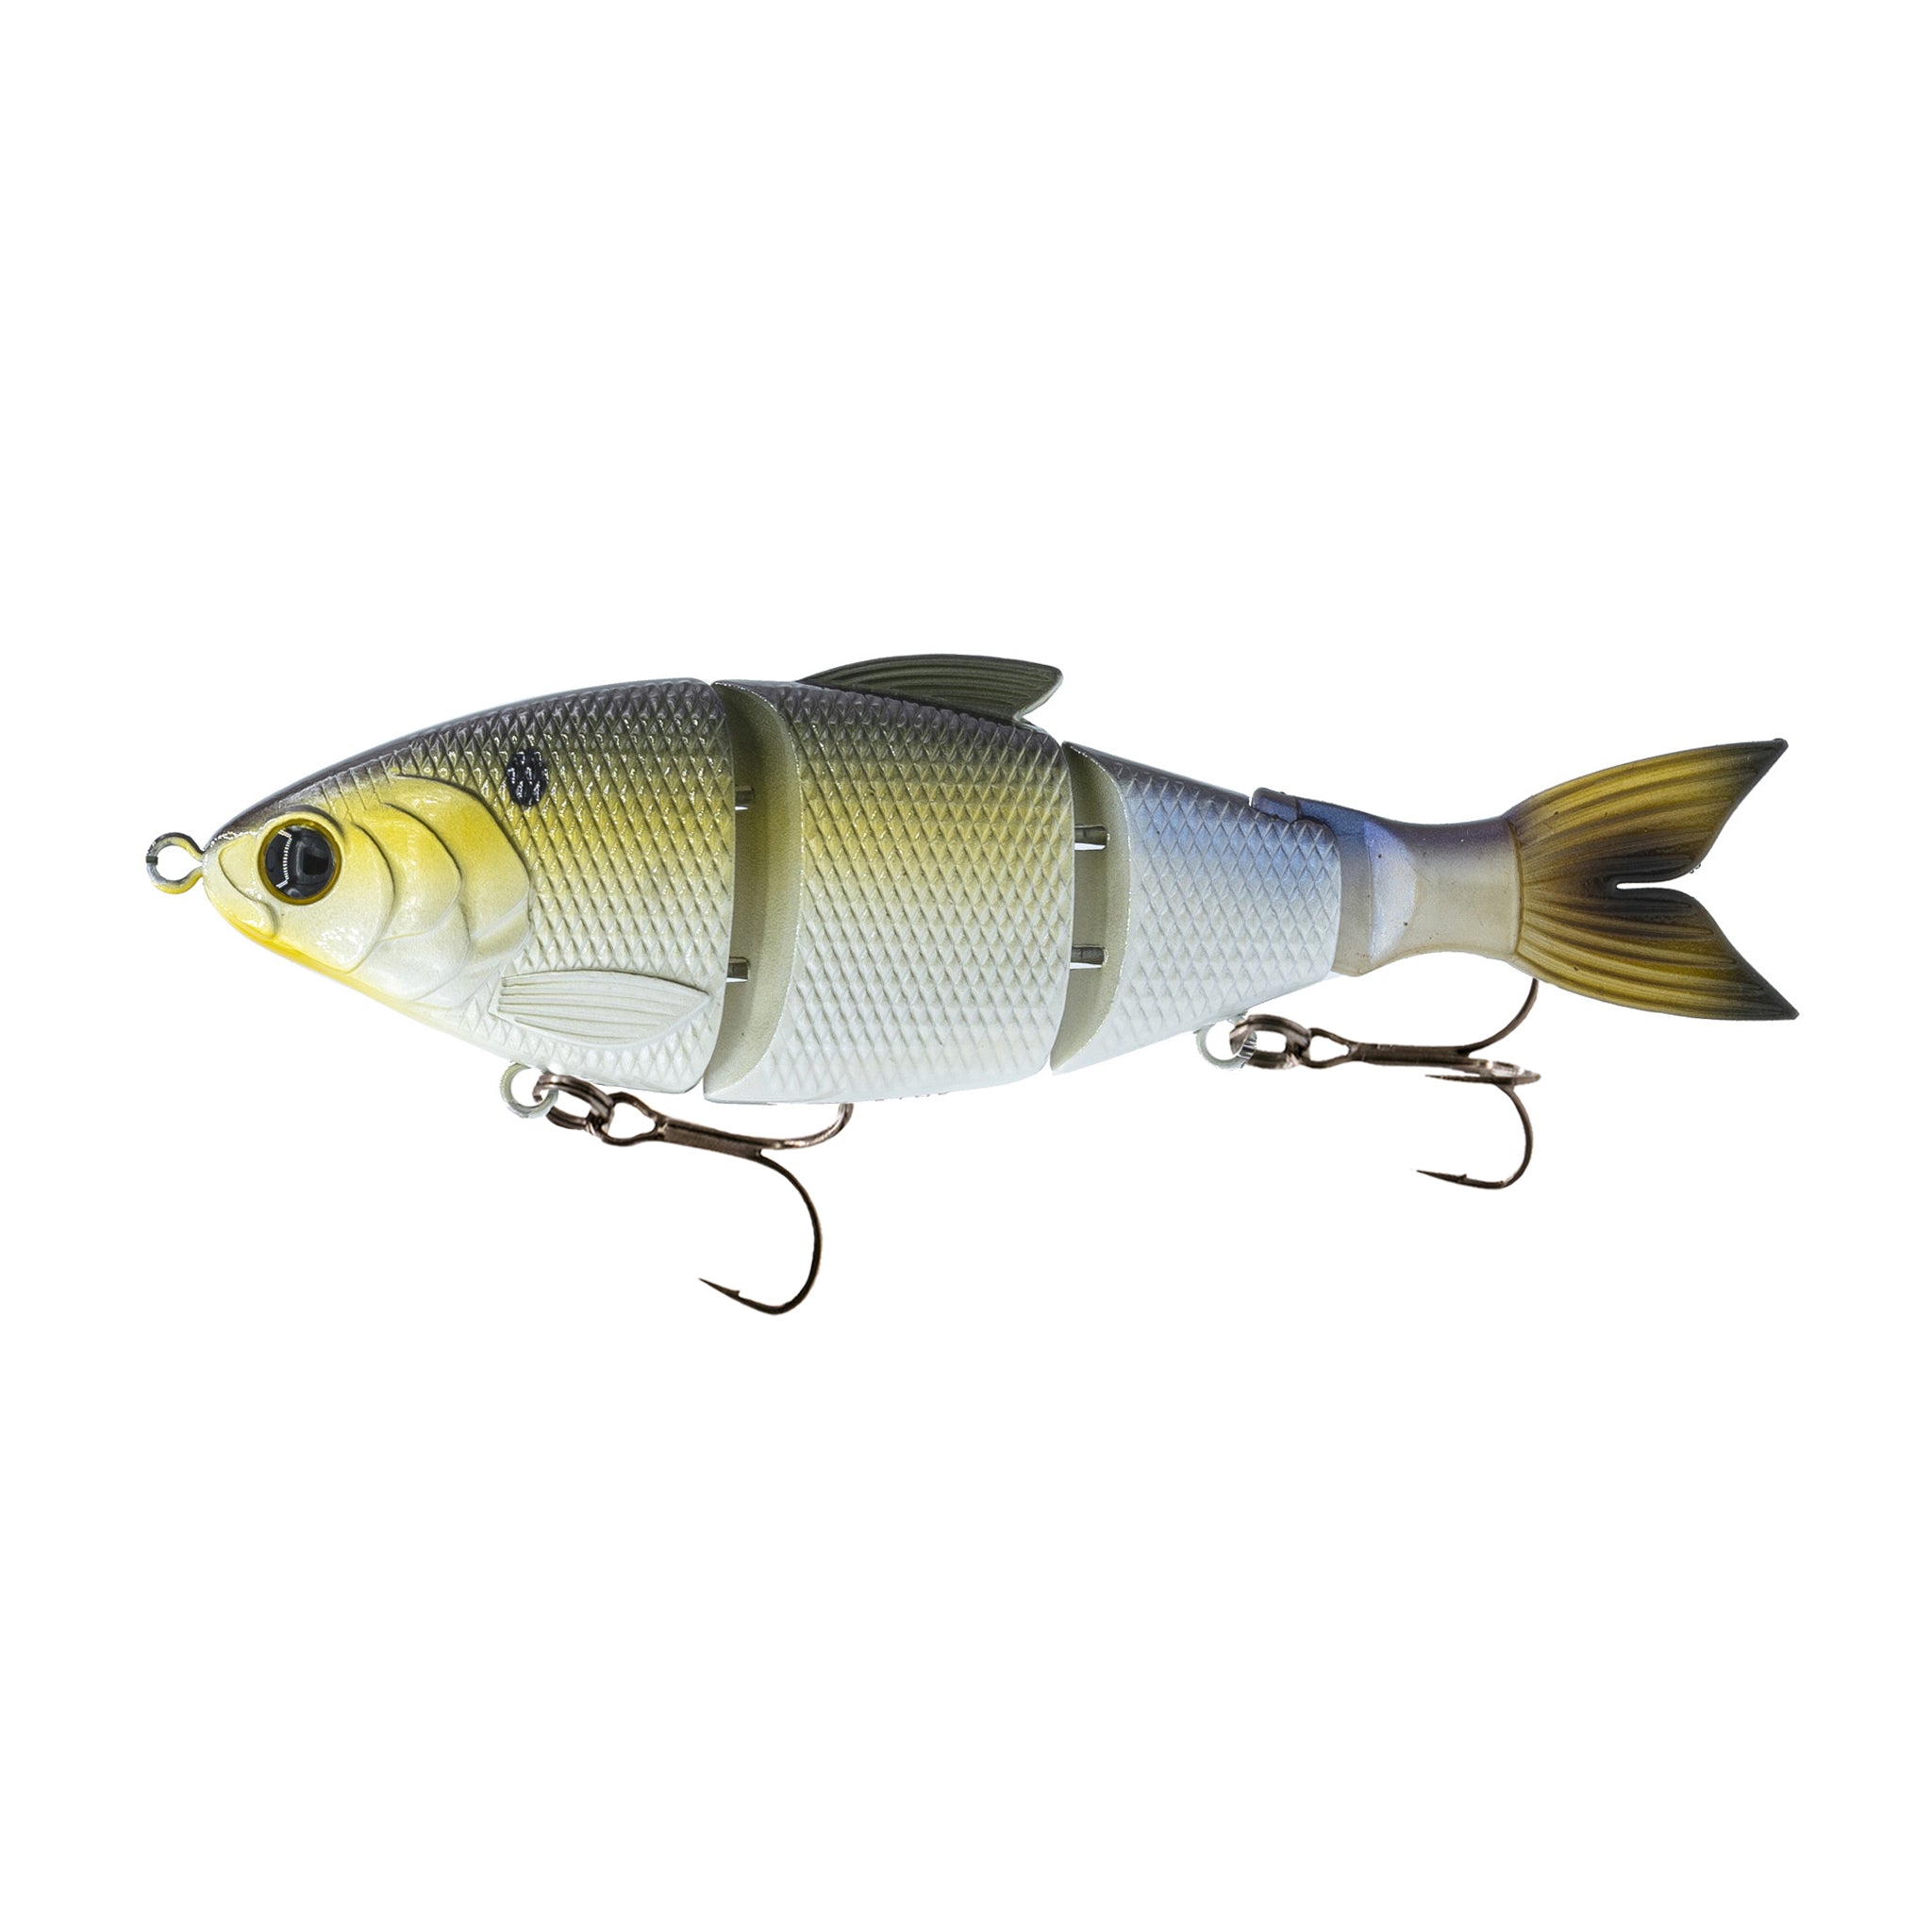 Trace 6 - Gizzard Shad